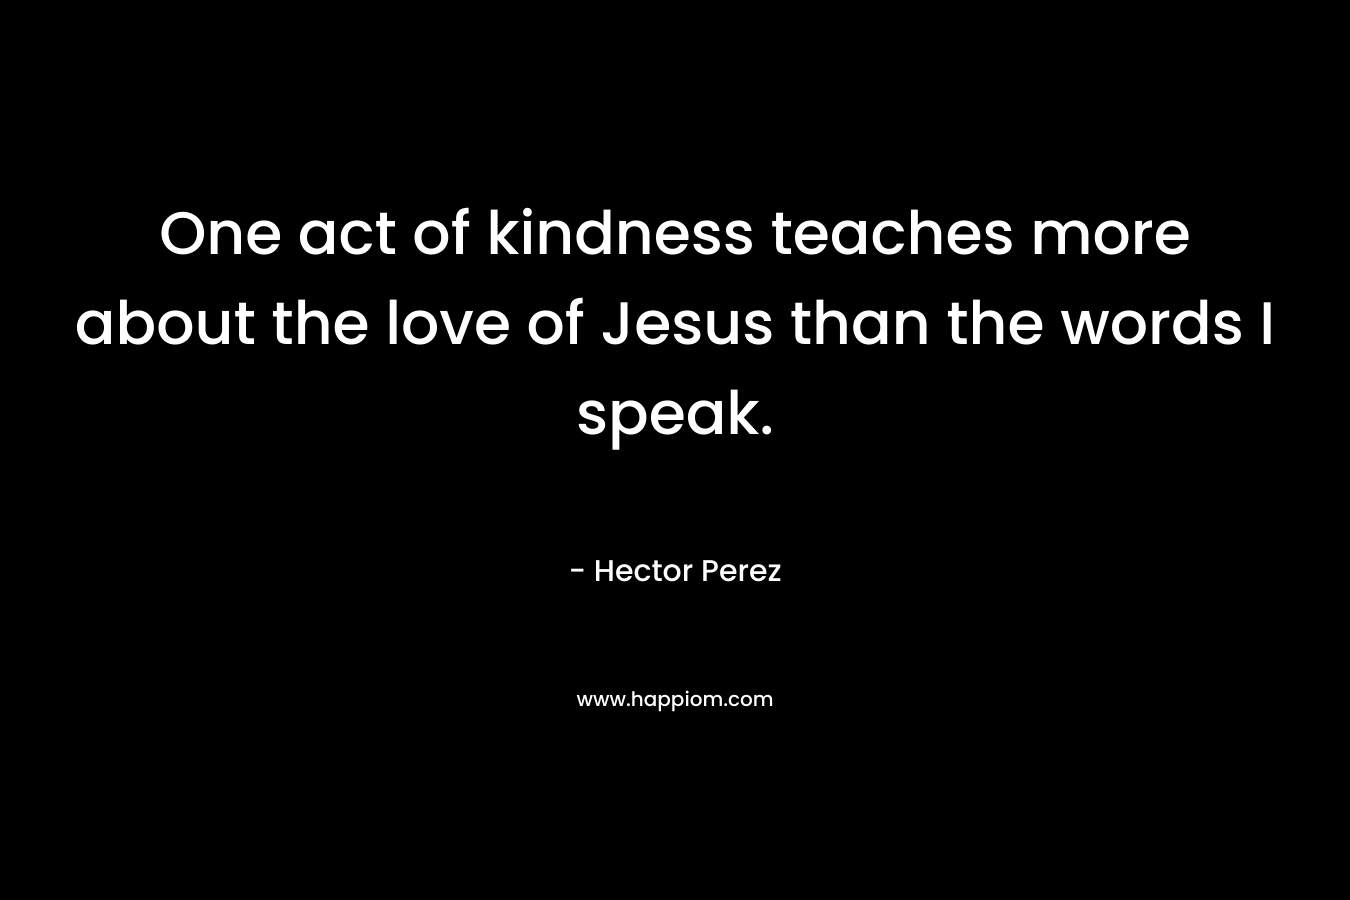 One act of kindness teaches more about the love of Jesus than the words I speak. – Hector Perez